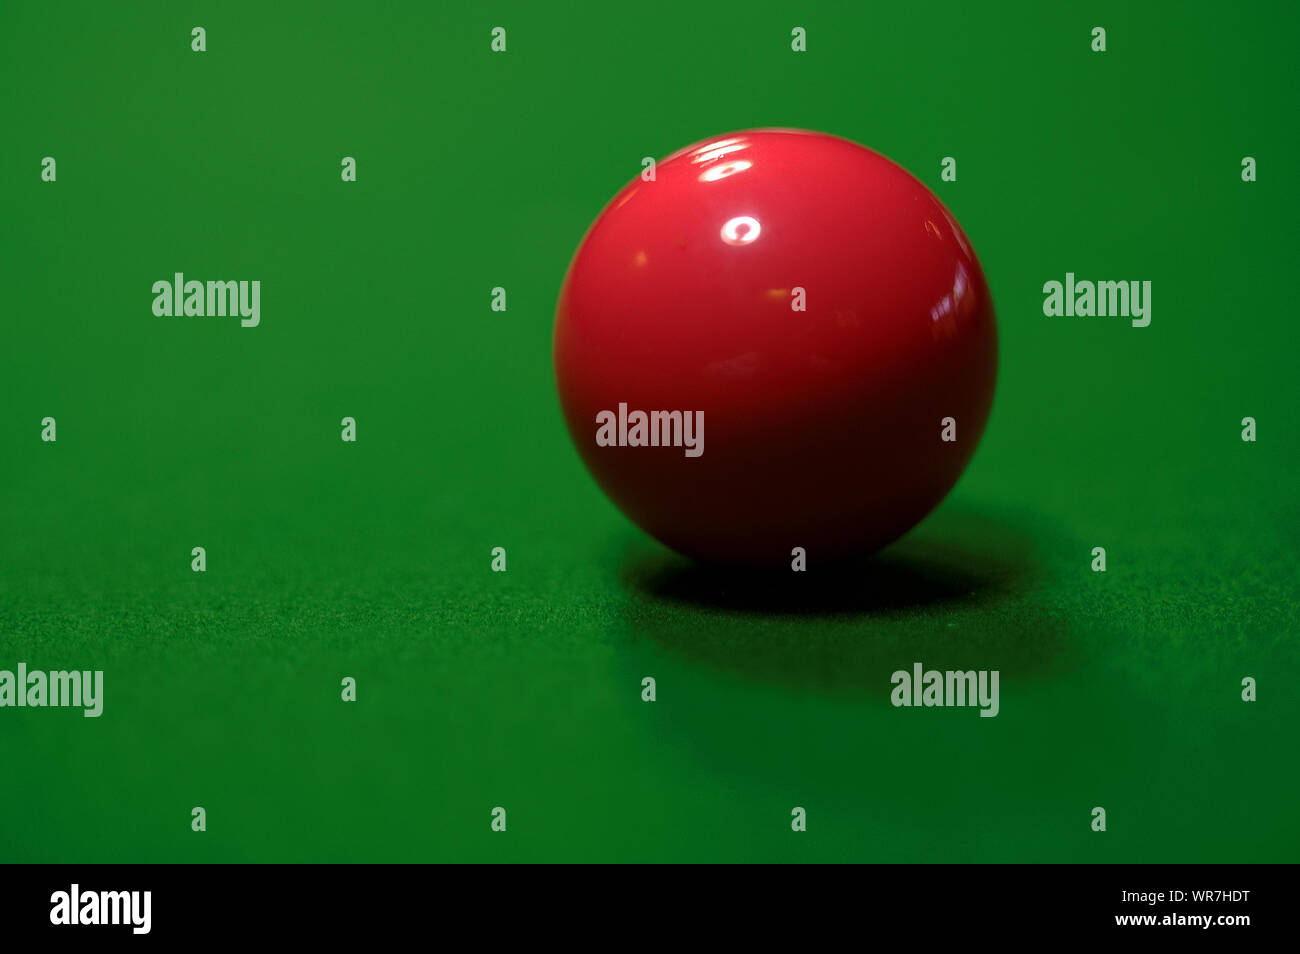 Close-up Of Red Snooker Ball On Table Stock Photo